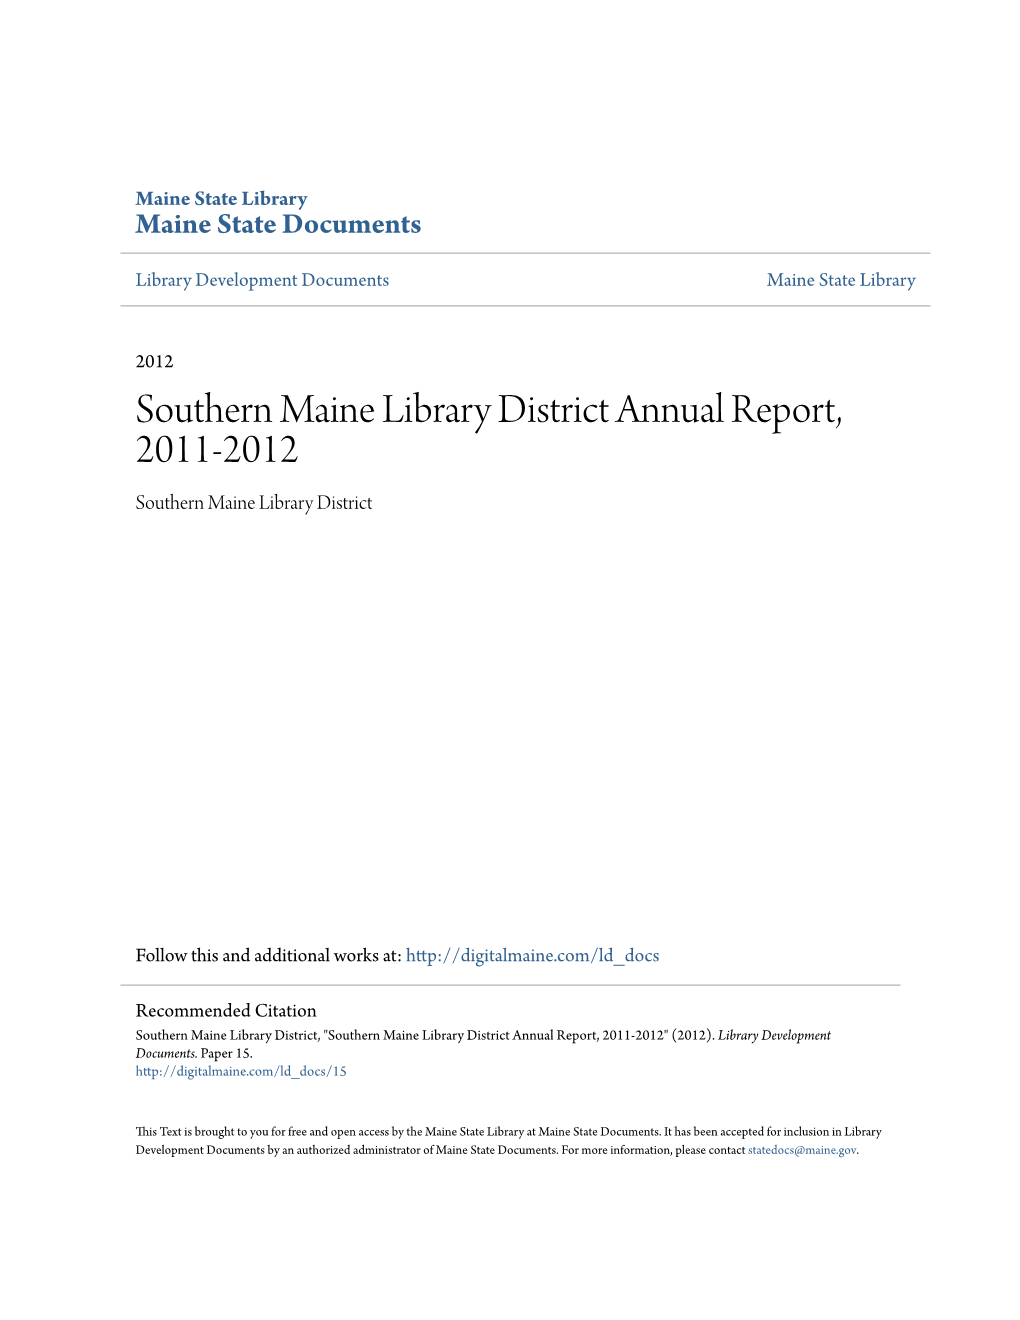 Southern Maine Library District Annual Report, 2011-2012 Southern Maine Library District